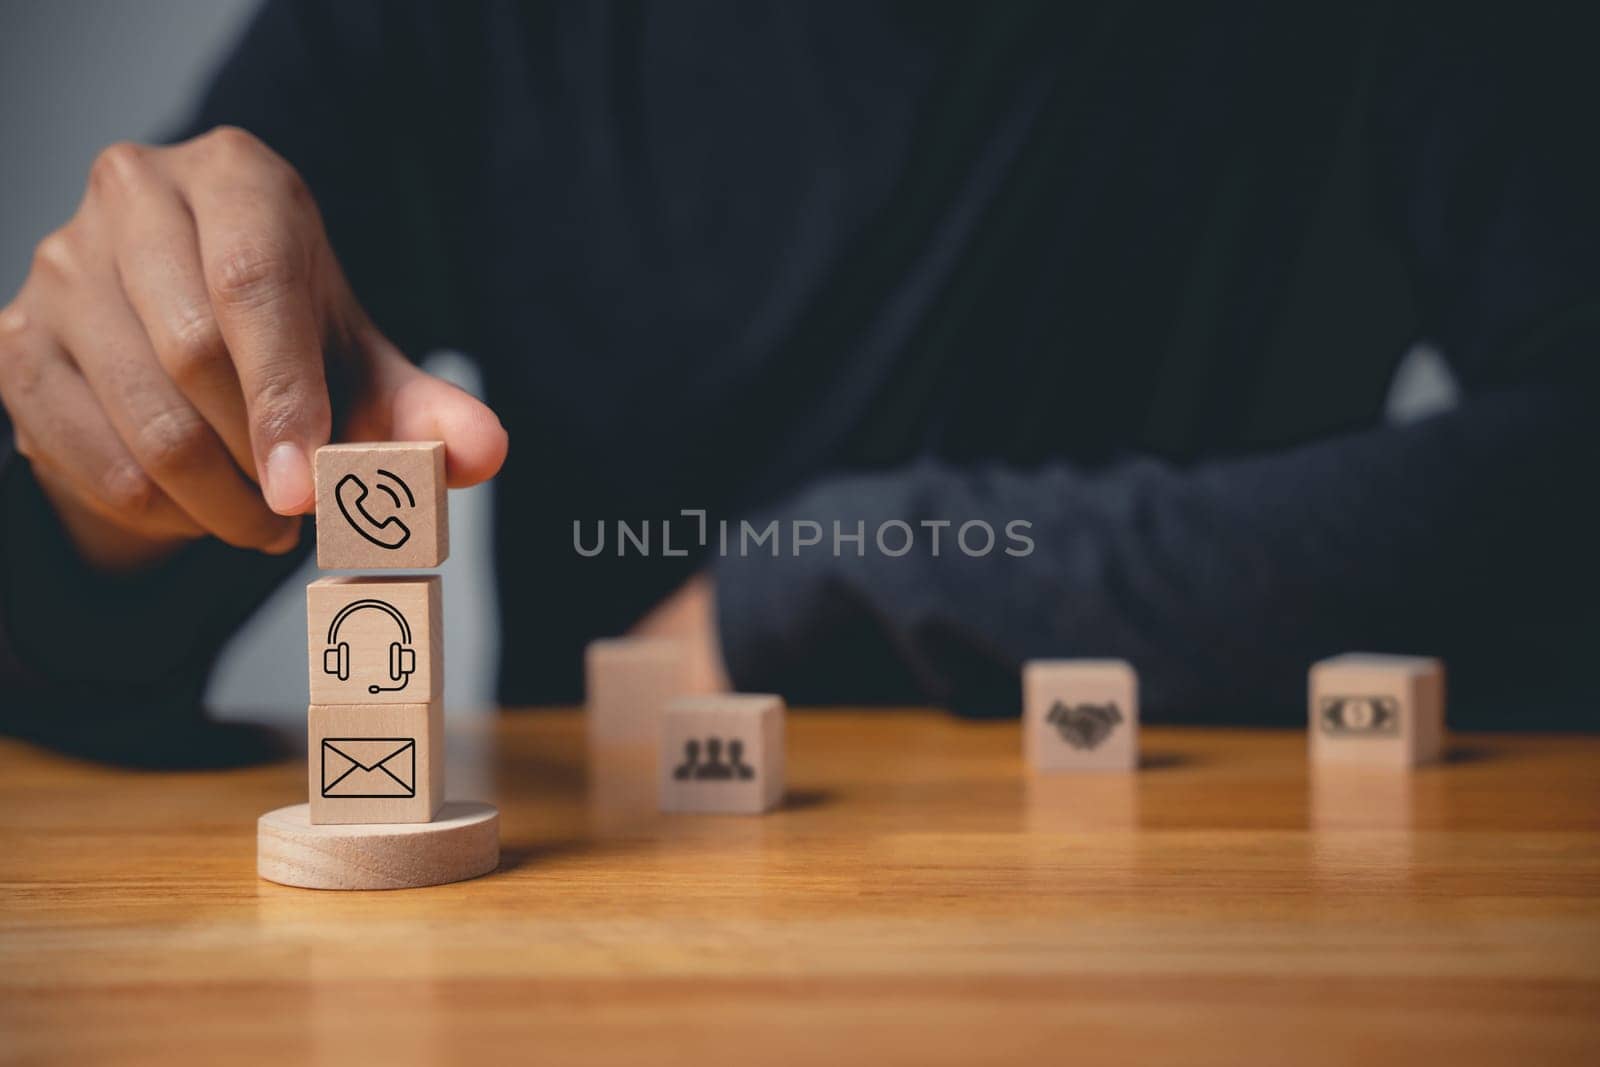 Contact us or e-mail marketing concept on website page. Customer support hotline connects people. Wood cube with email, phone, address, and headset icons. Symbolizes communication.